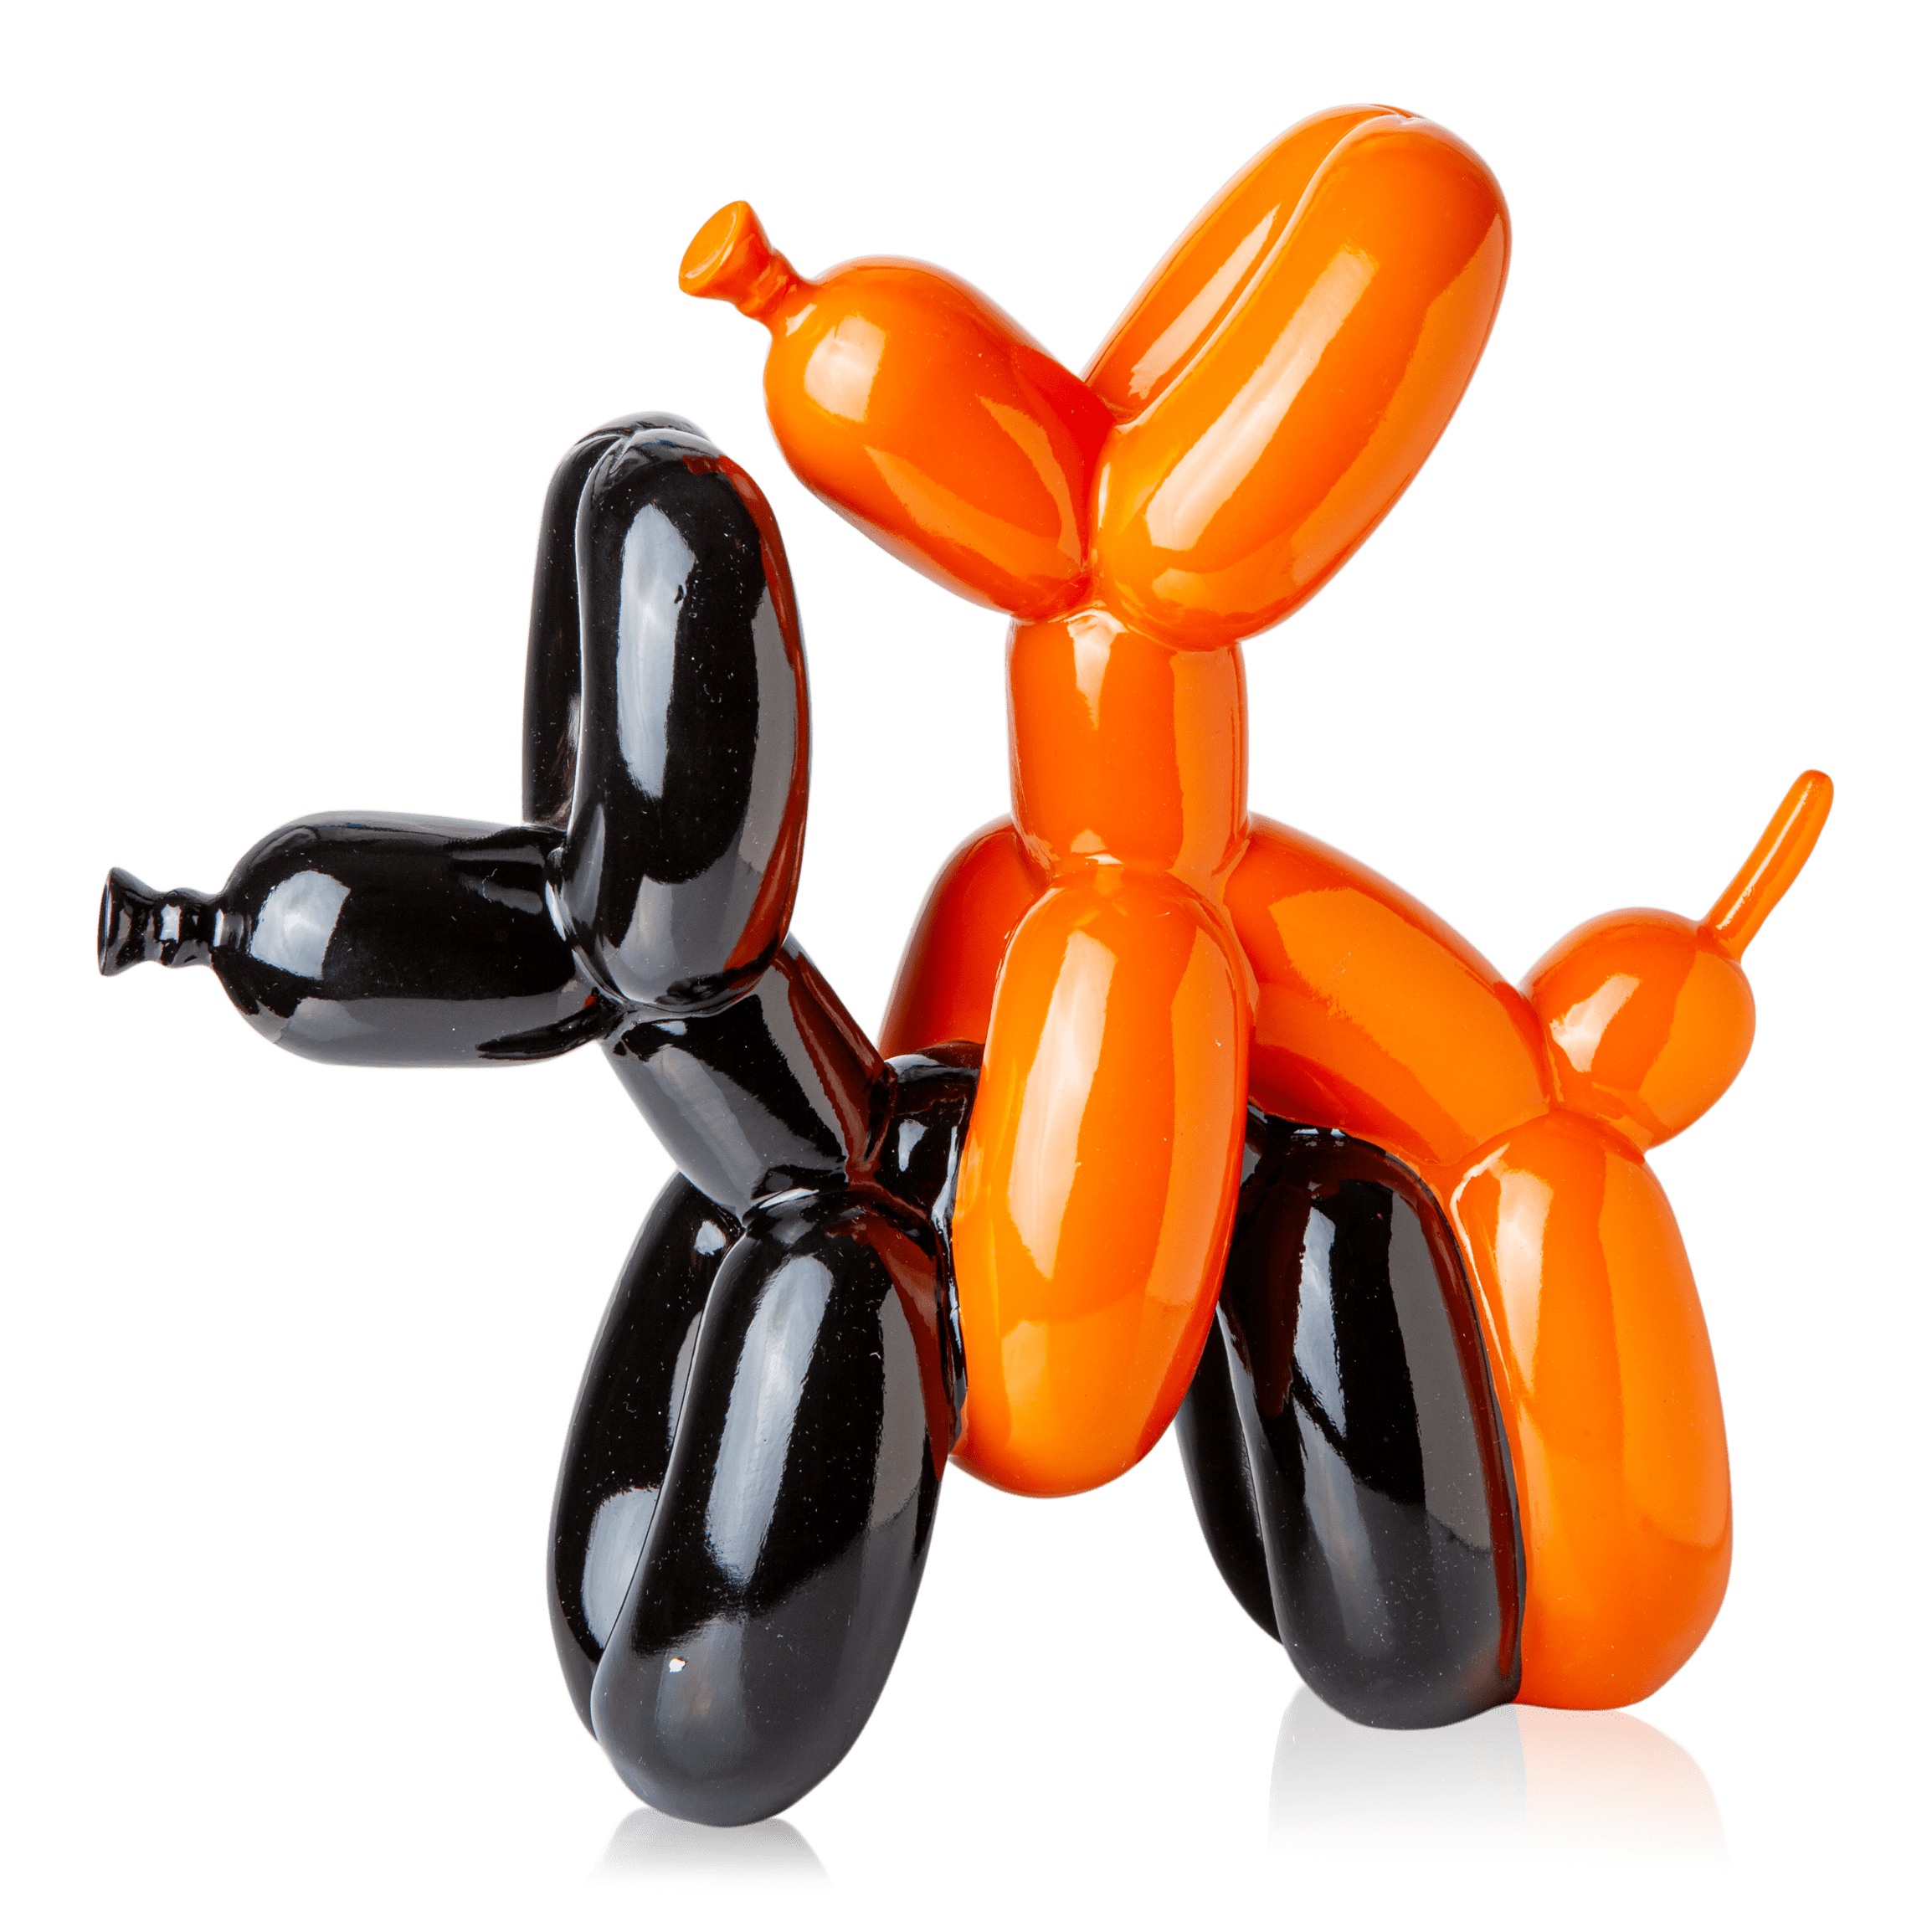 Getting Busy Balloon Dog Sculpture